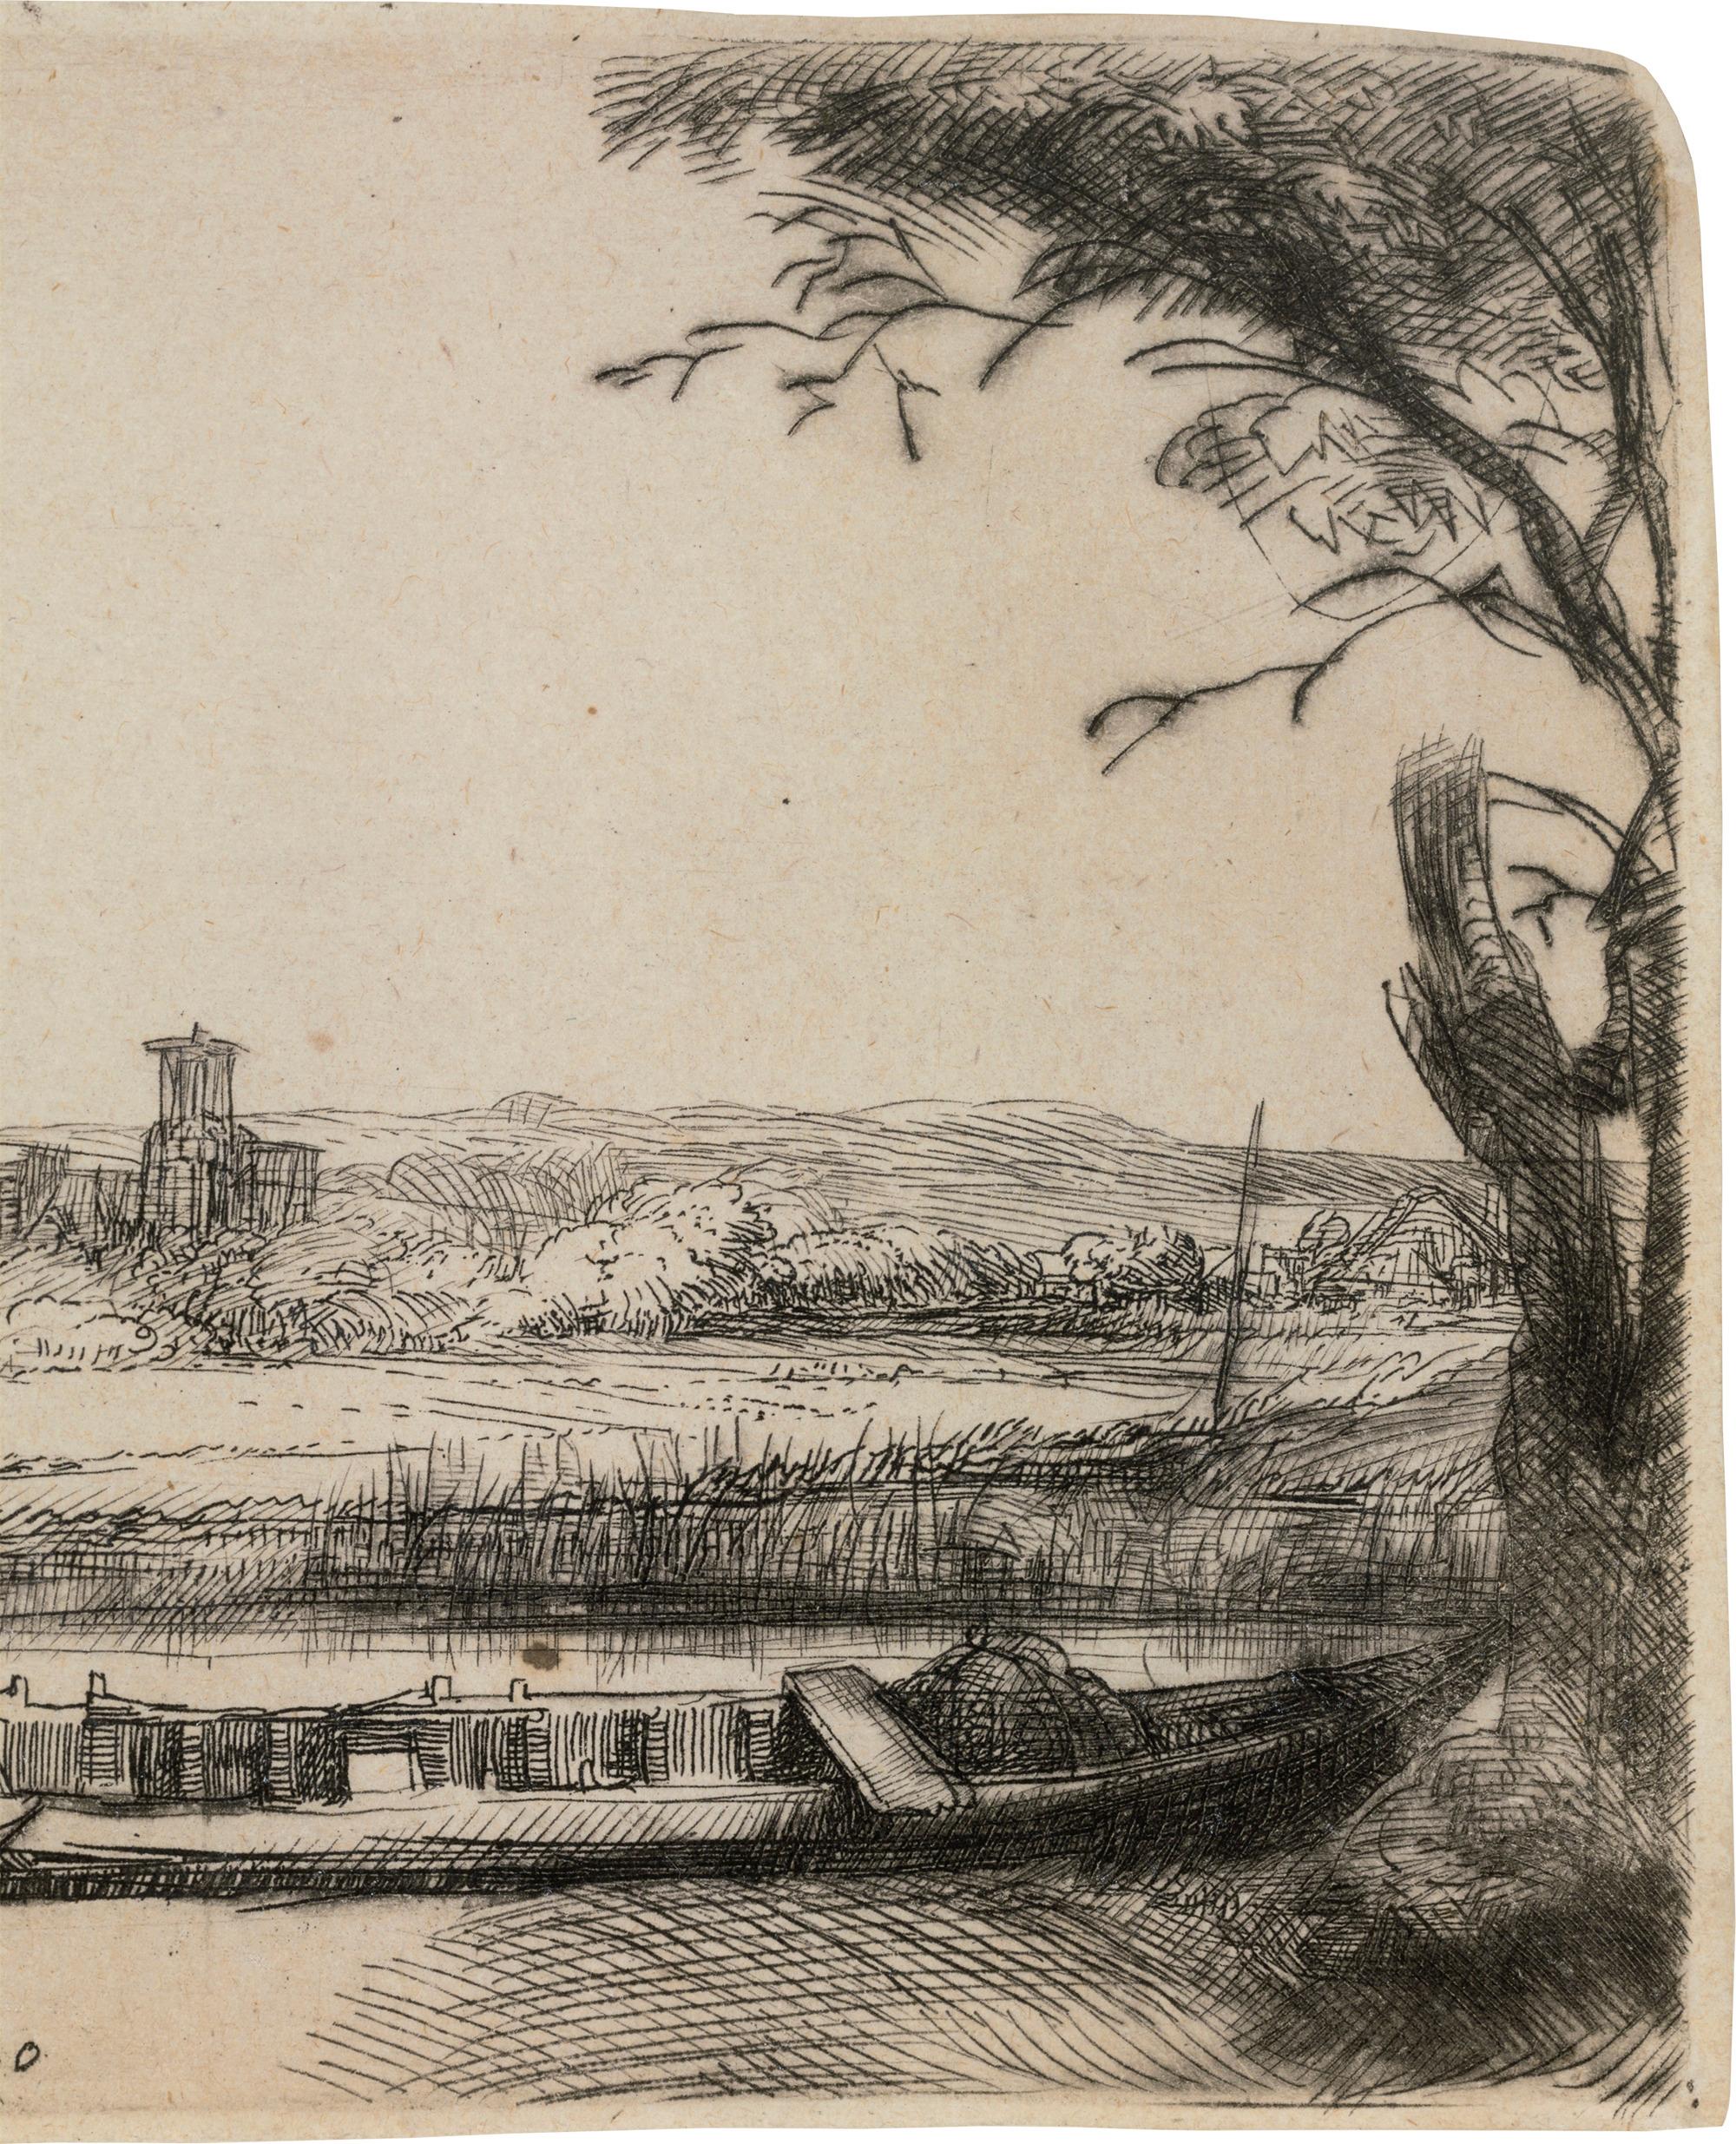 Rembrandt van Rijn
1606-1669  Dutch

Canal with a Large Boat and a Bridge

Etching on paper
New Hollstein Dutch 252: second state of two
Signed and dated lower left: Rembrandt. f. 1650 / (d and 6 en verso)

Among the very best of the Old Masters